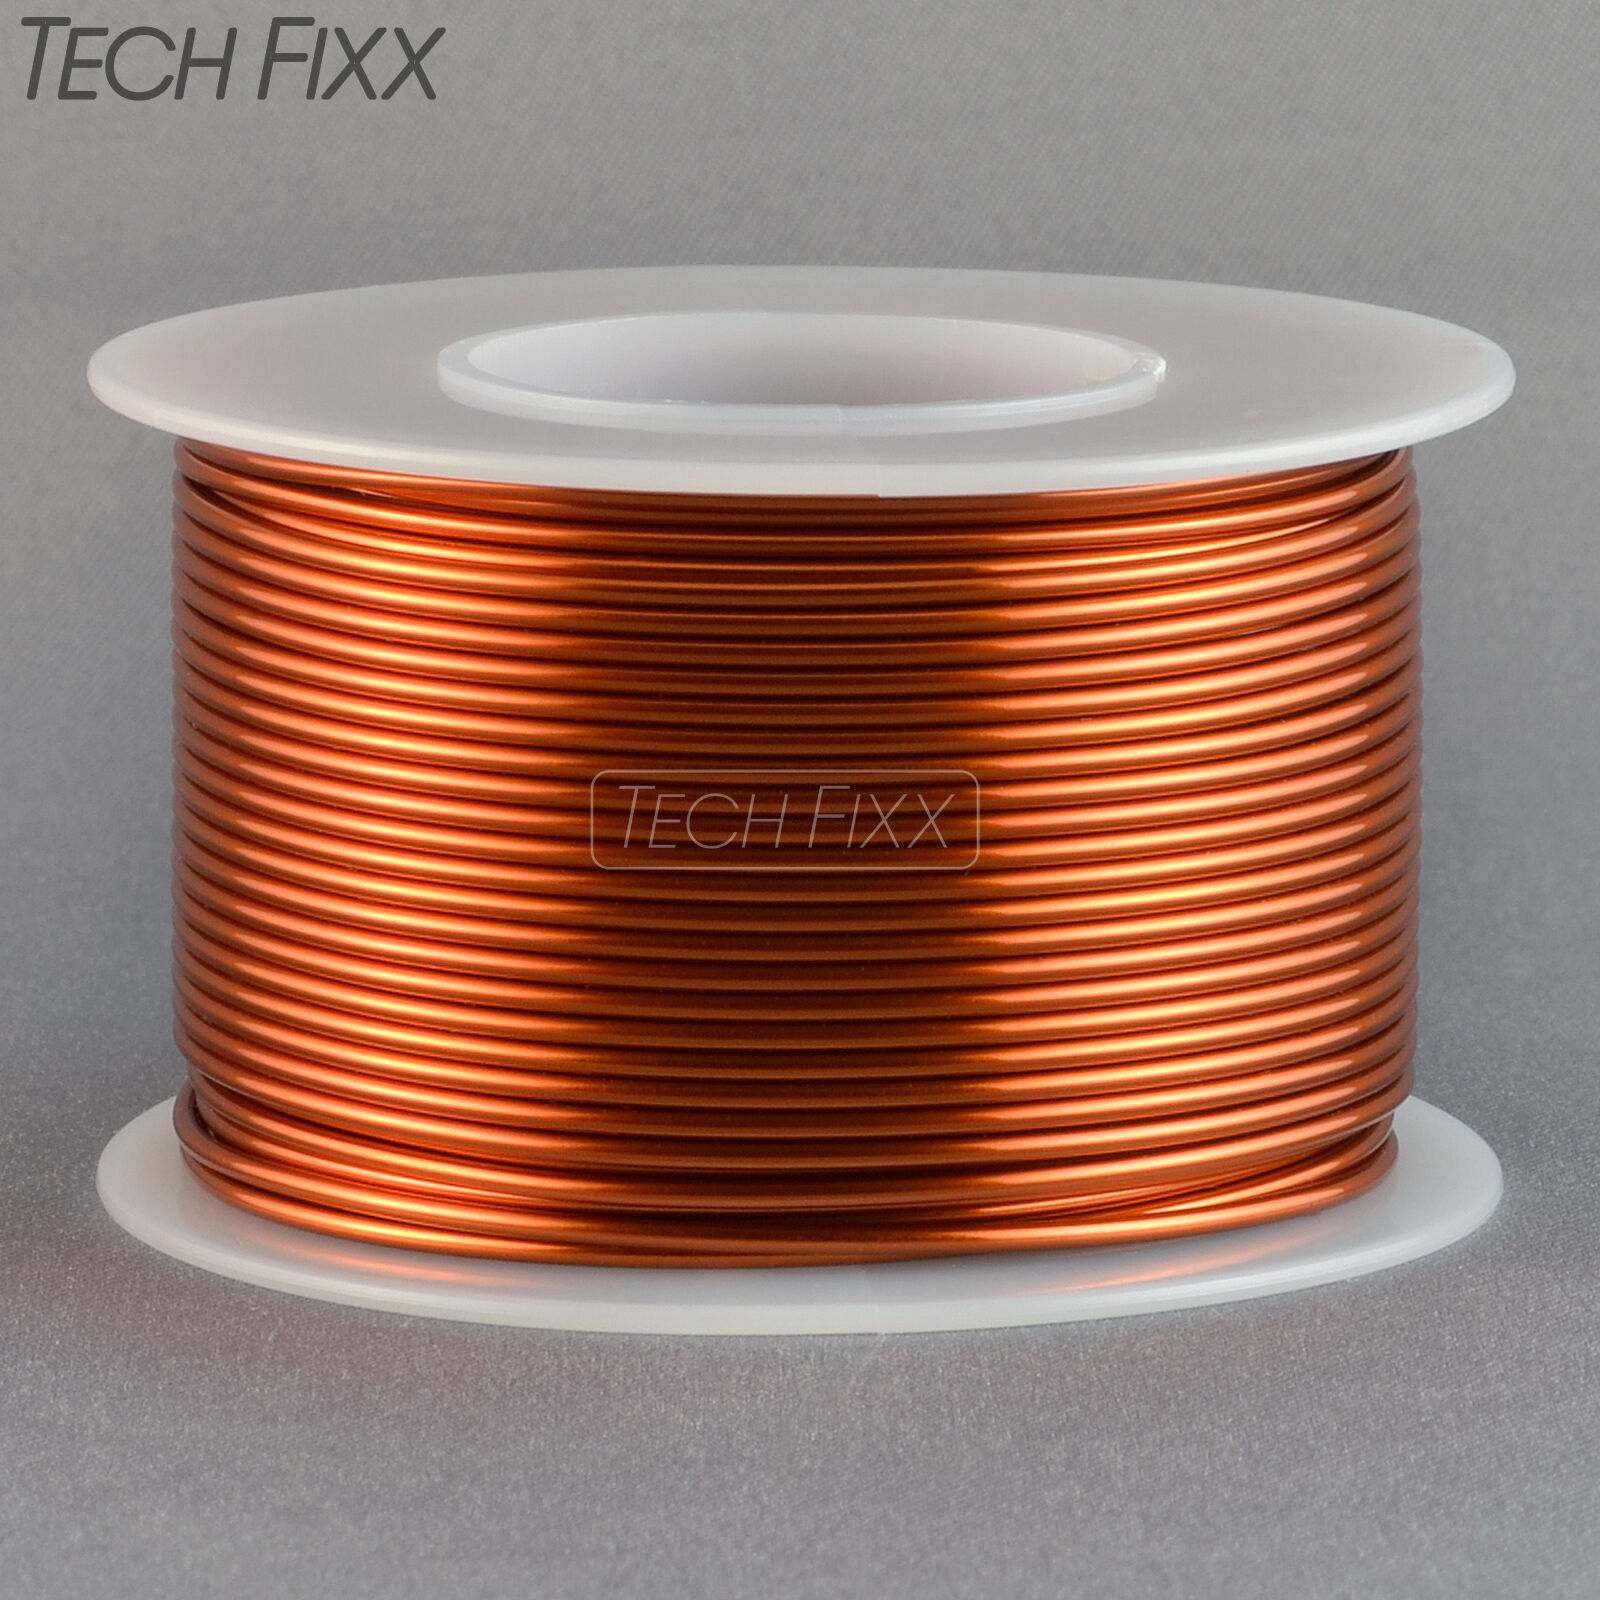 Magnet Wire 18 Gauge AWG Enameled Copper 96 Feet Coil Winding and Crafts 200C